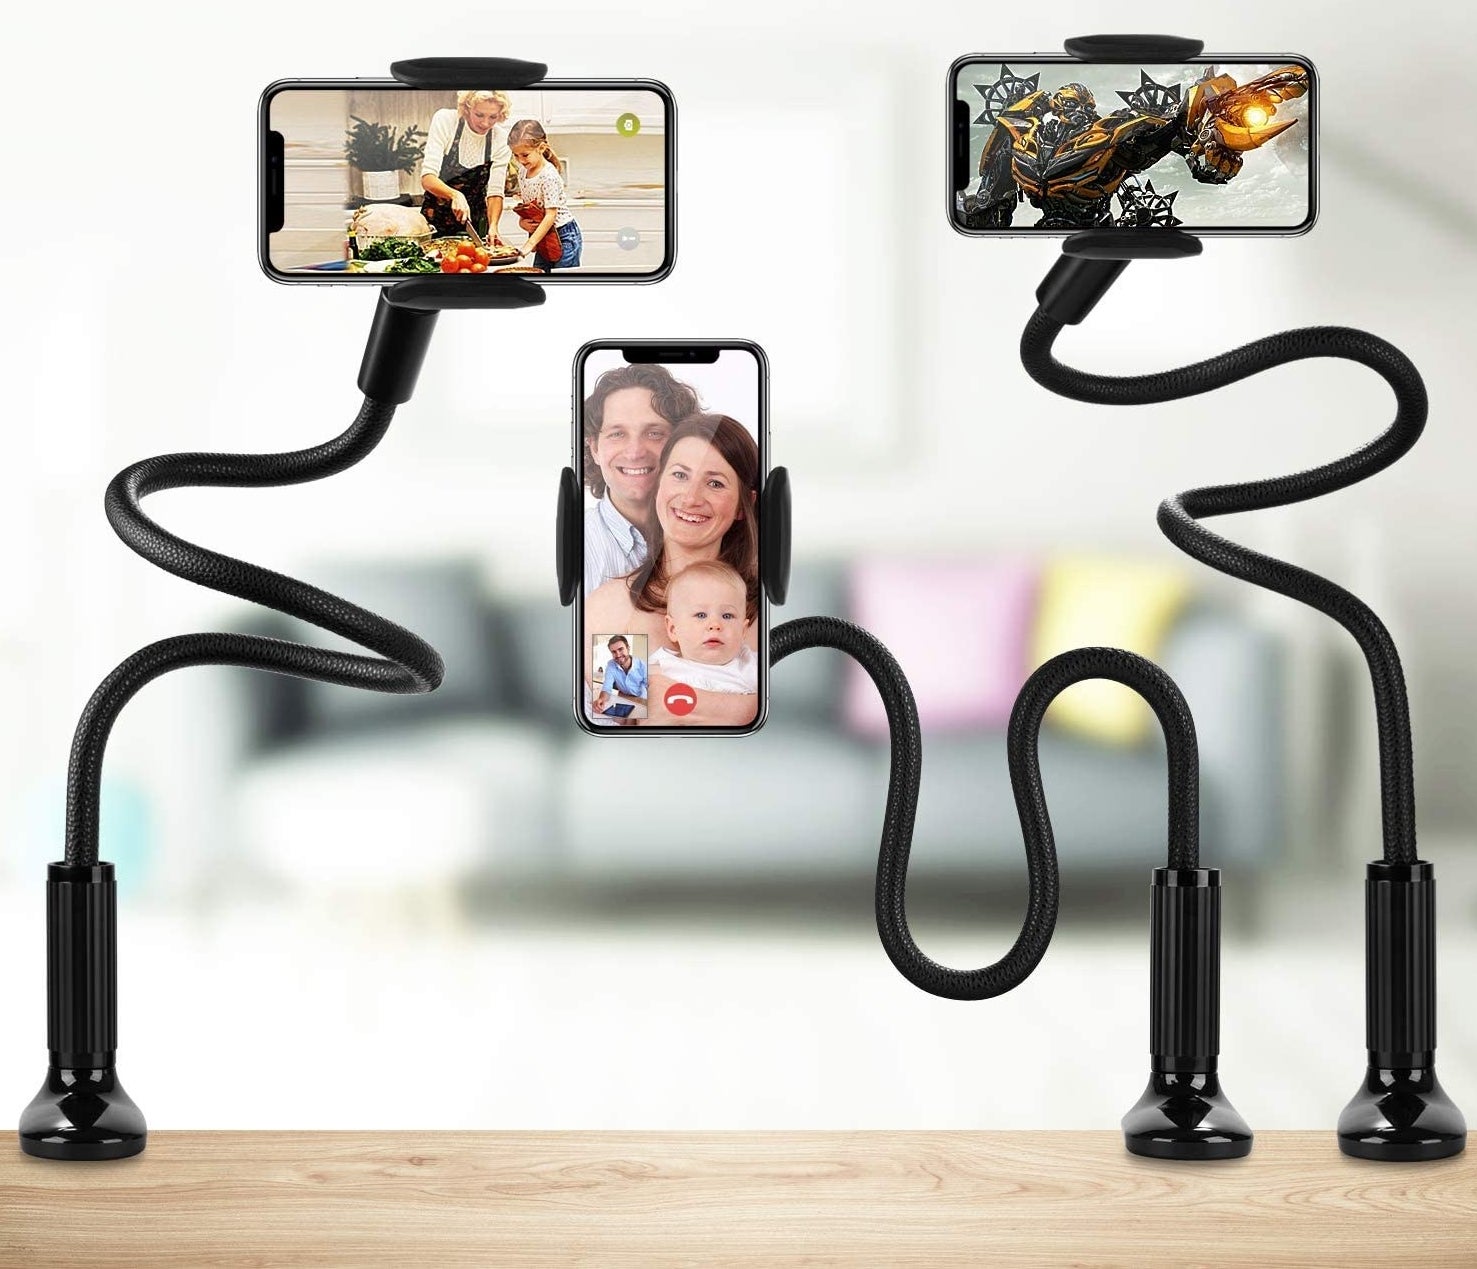 several configurations of the flexible phone stand